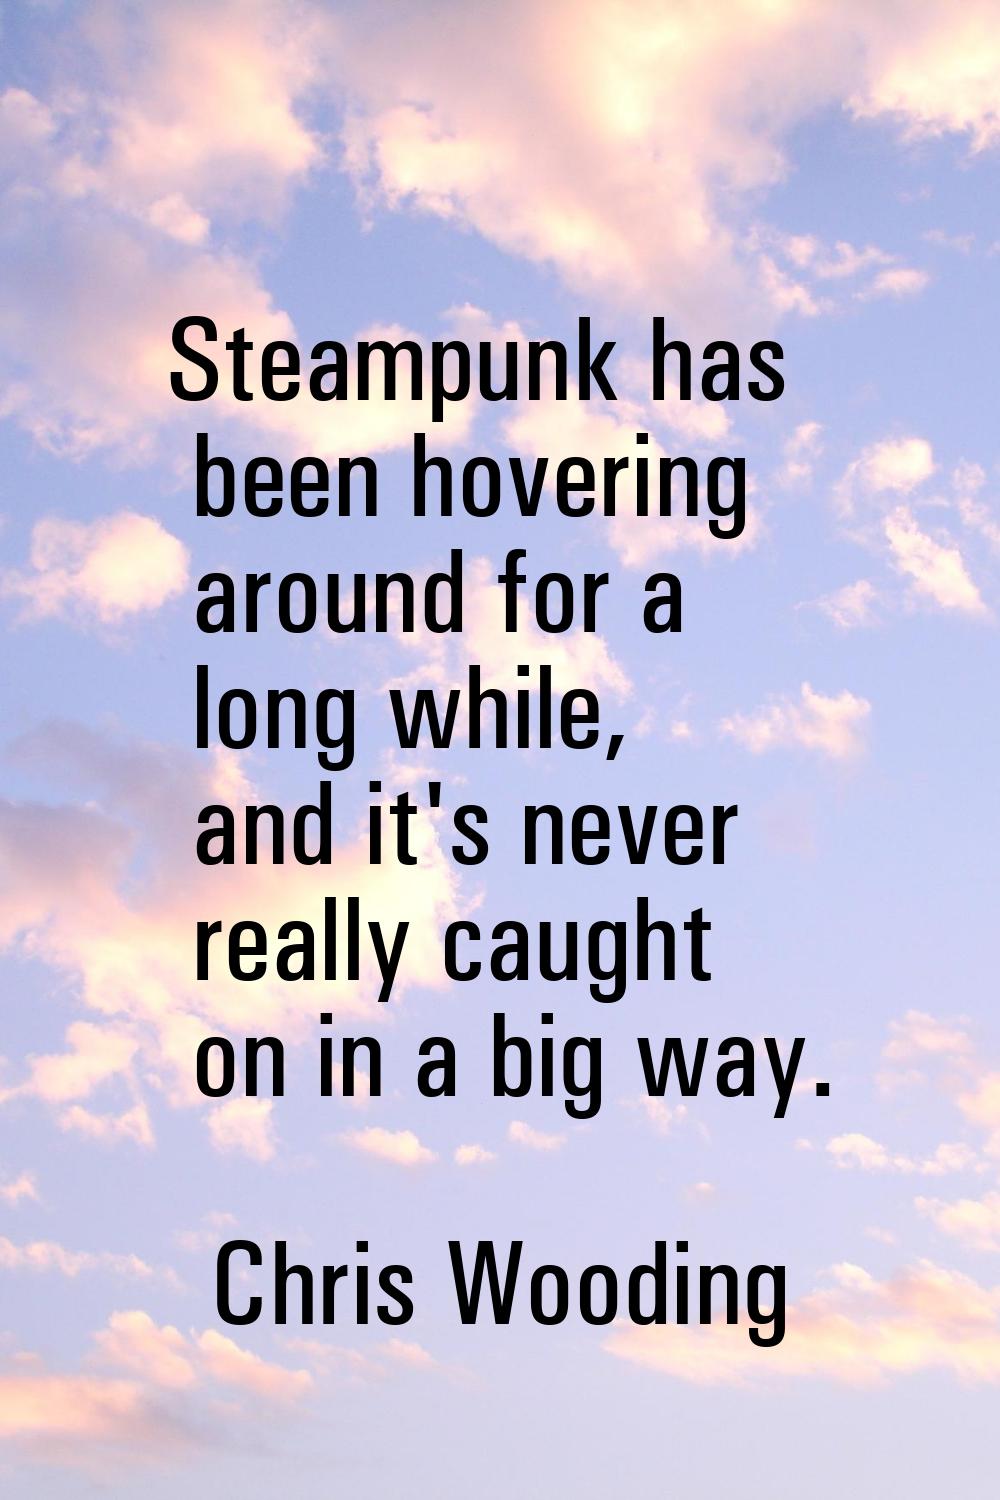 Steampunk has been hovering around for a long while, and it's never really caught on in a big way.